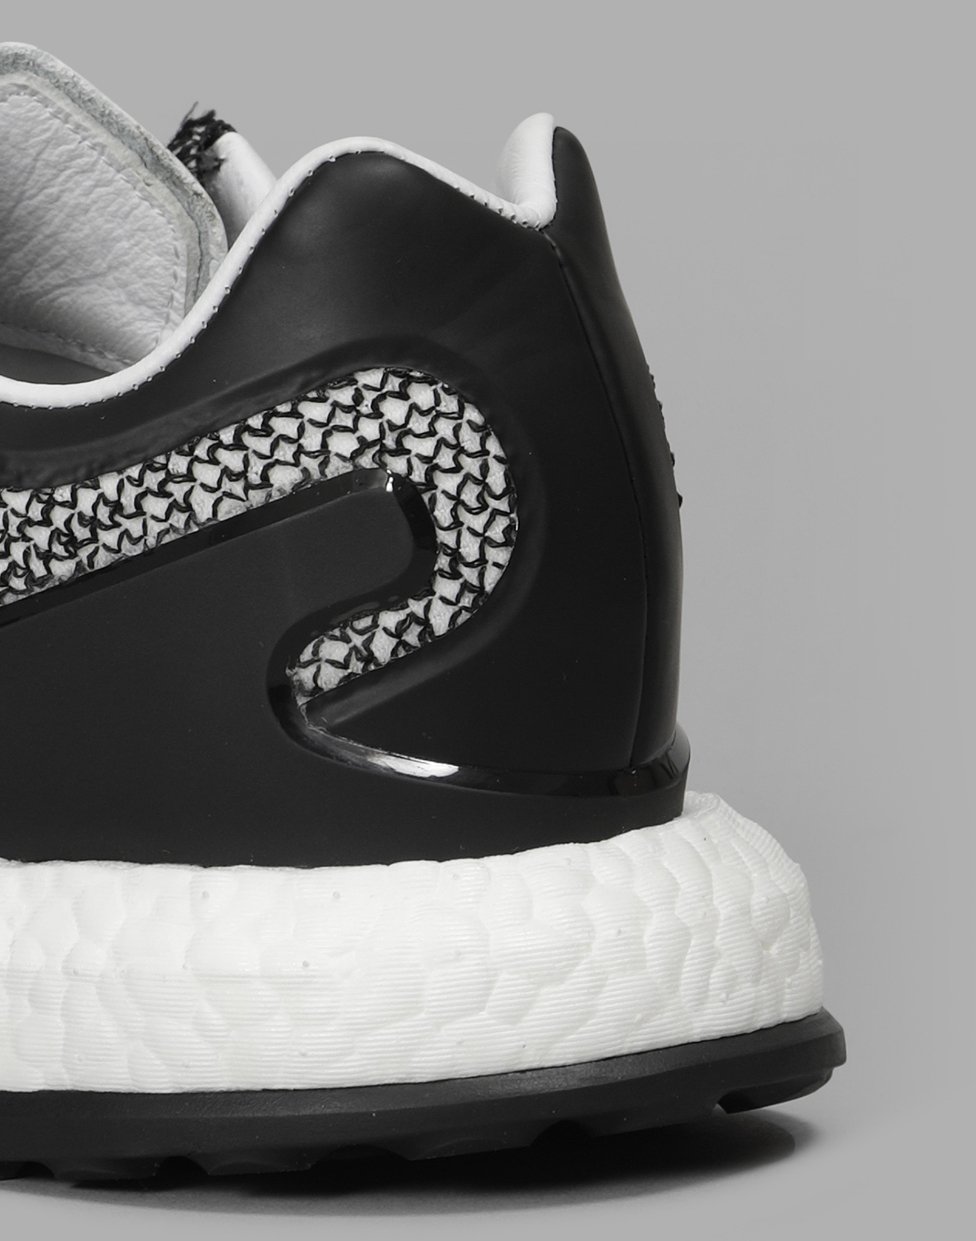 adidas Y-3 Pure Boost Oreo Release Date